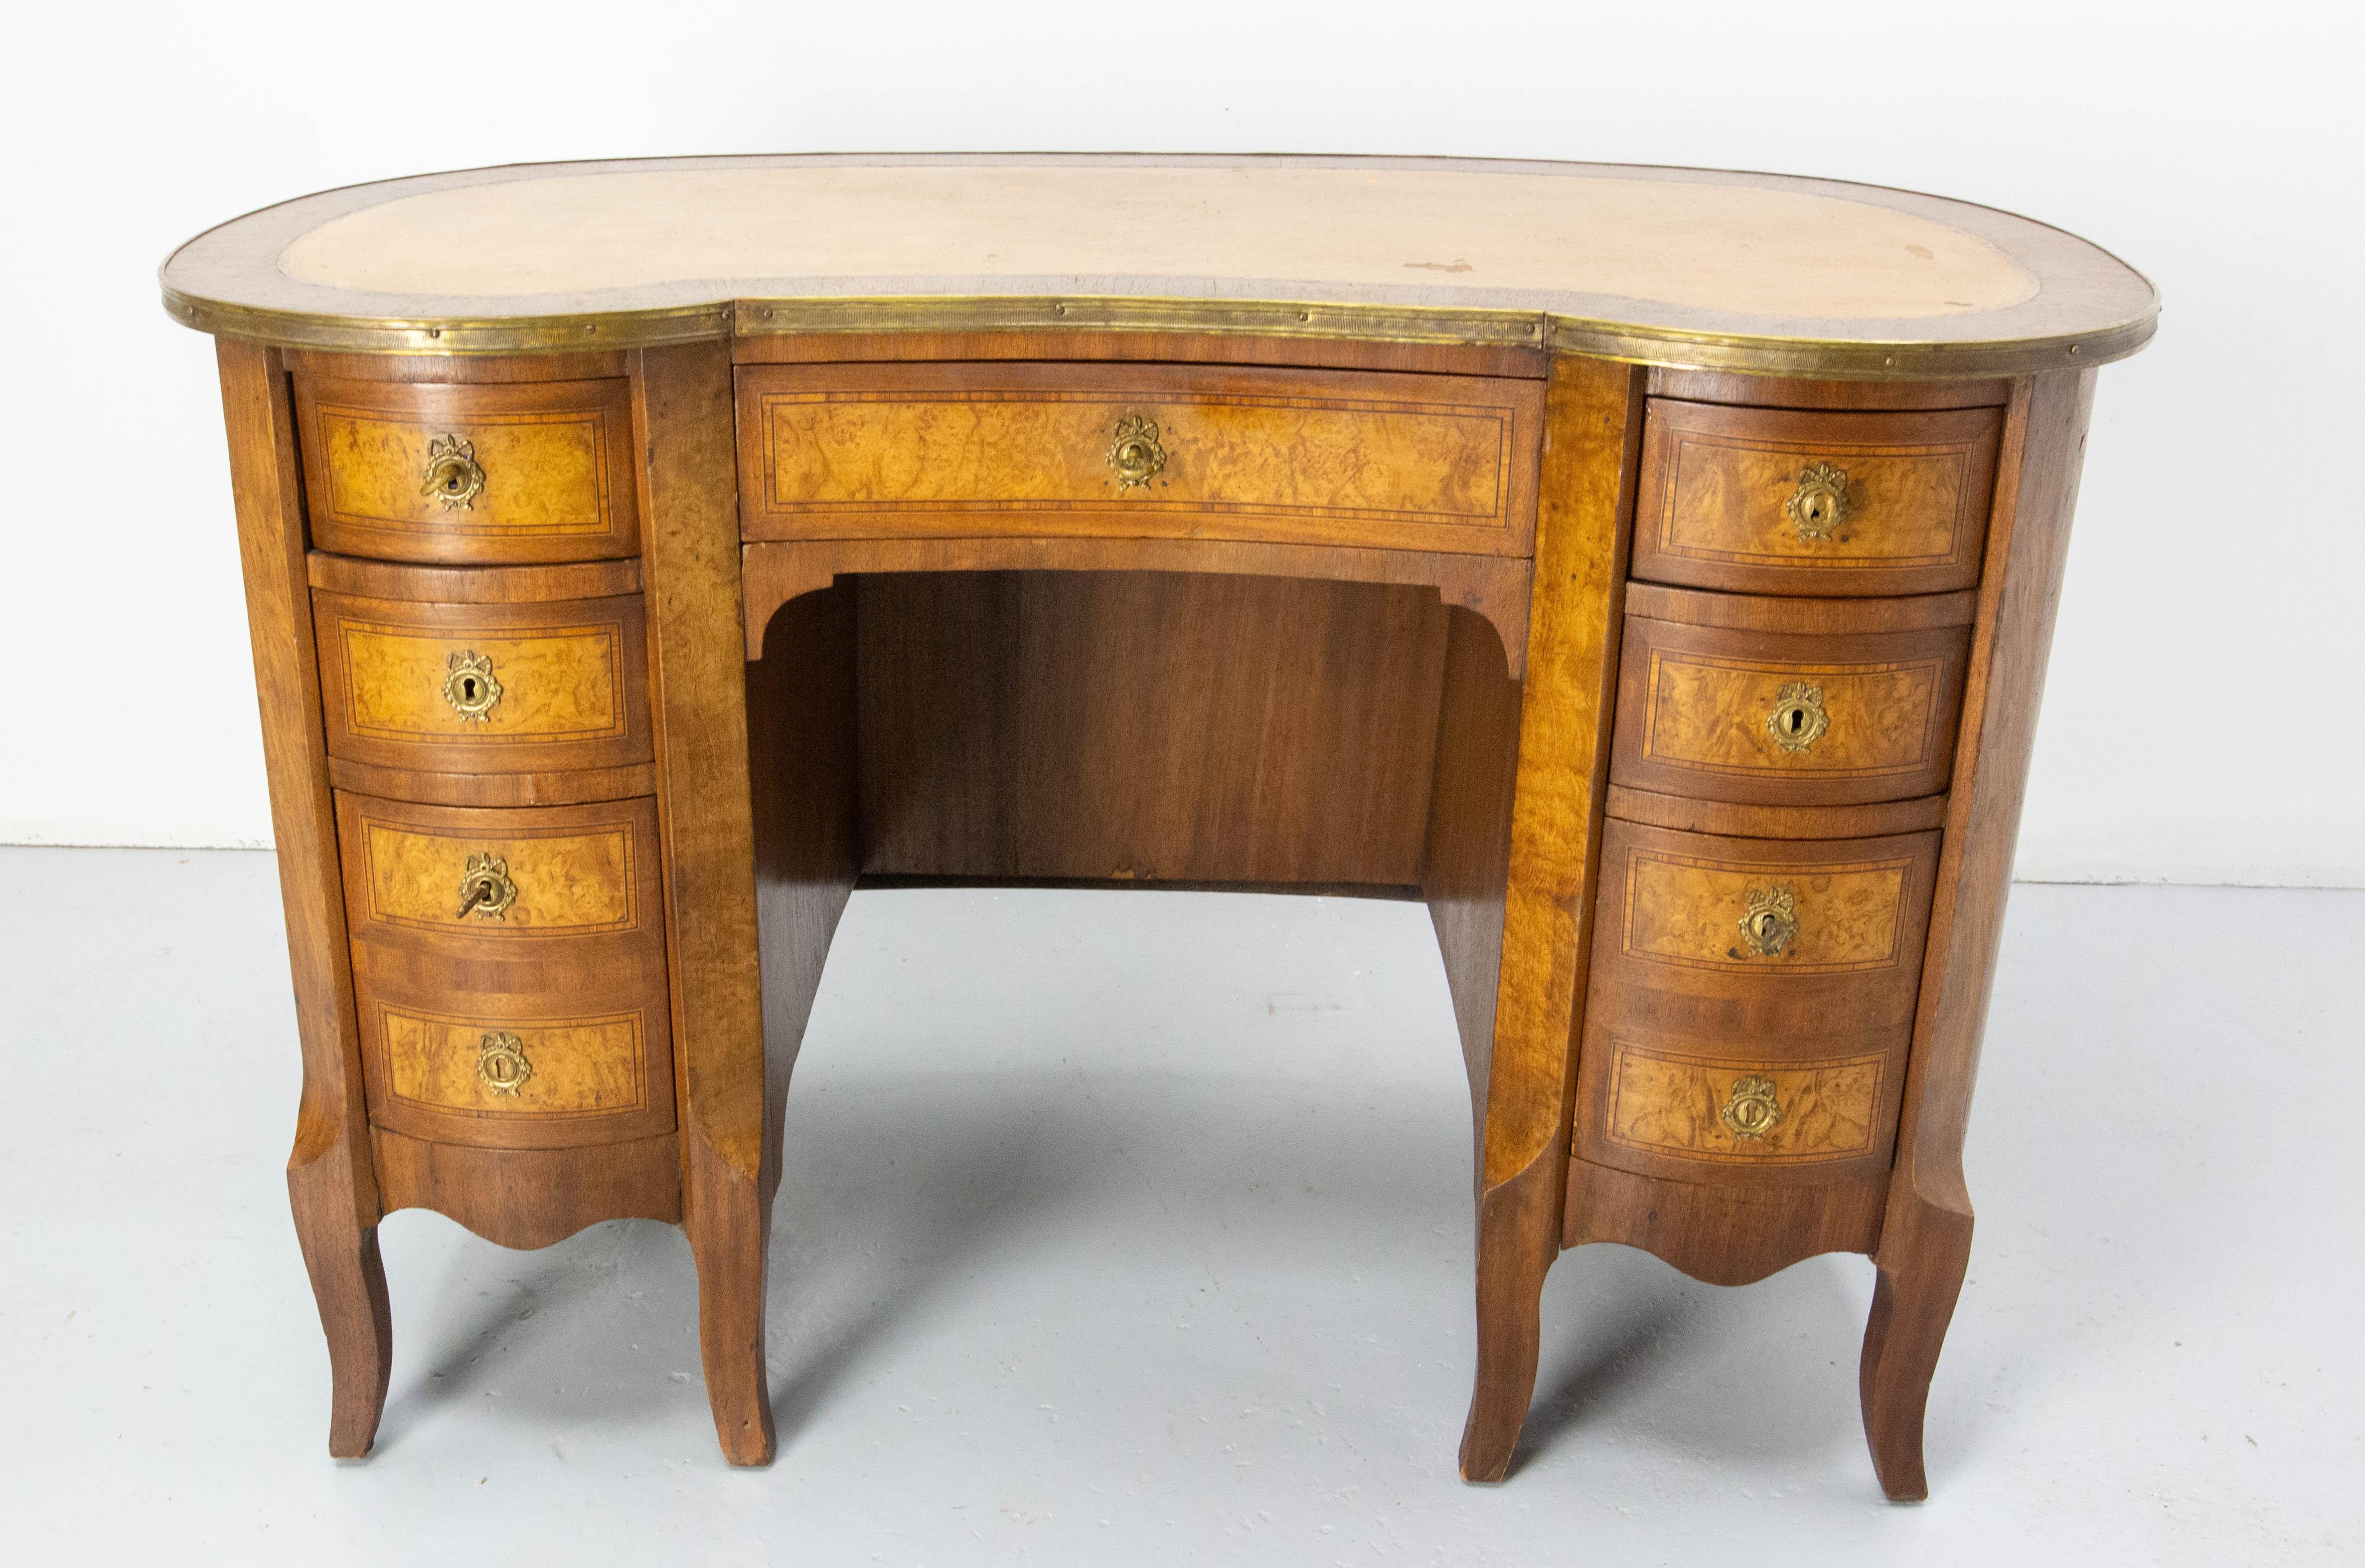 Desk in the kidney style. This shape of tops on the furnitures is typical of the 18th century. It is found in the Louis XV style with curved legs and in the Louis XVI style with straight legs.
In France, during the 60's furniture styles from many